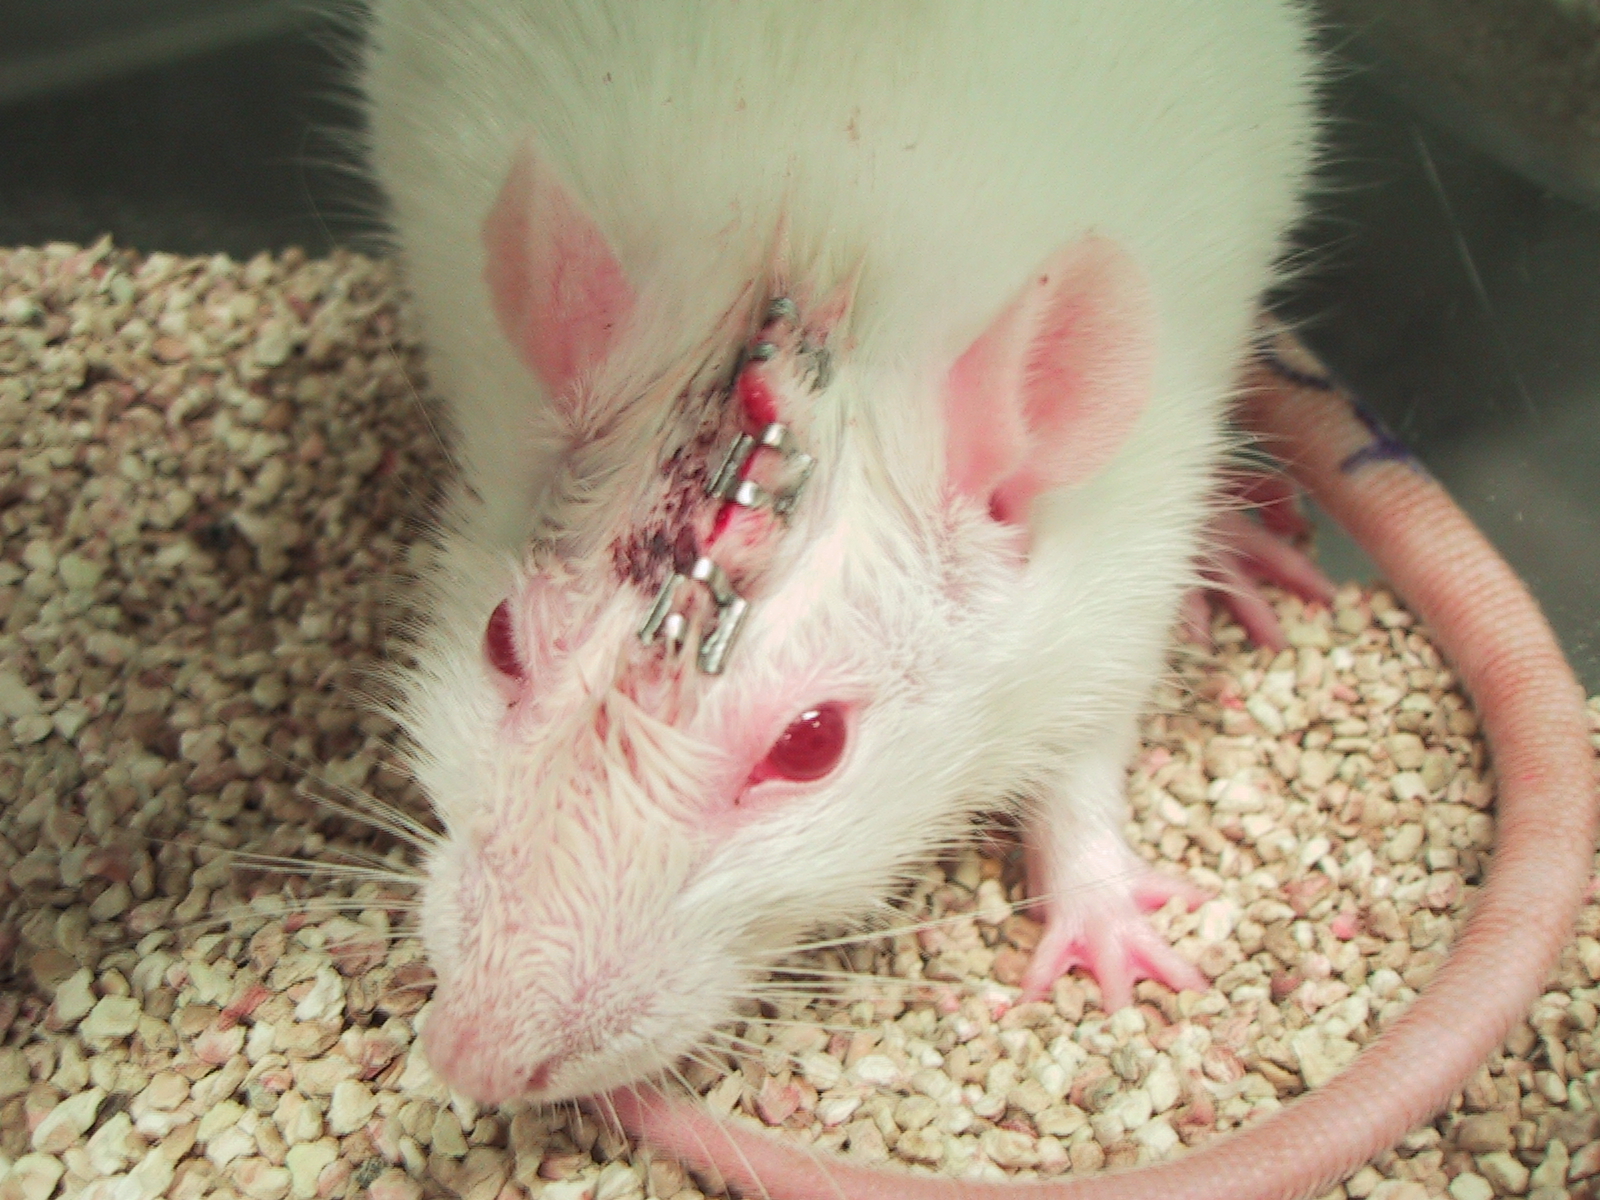 Why Harmful Animal Research Should Be Stopped